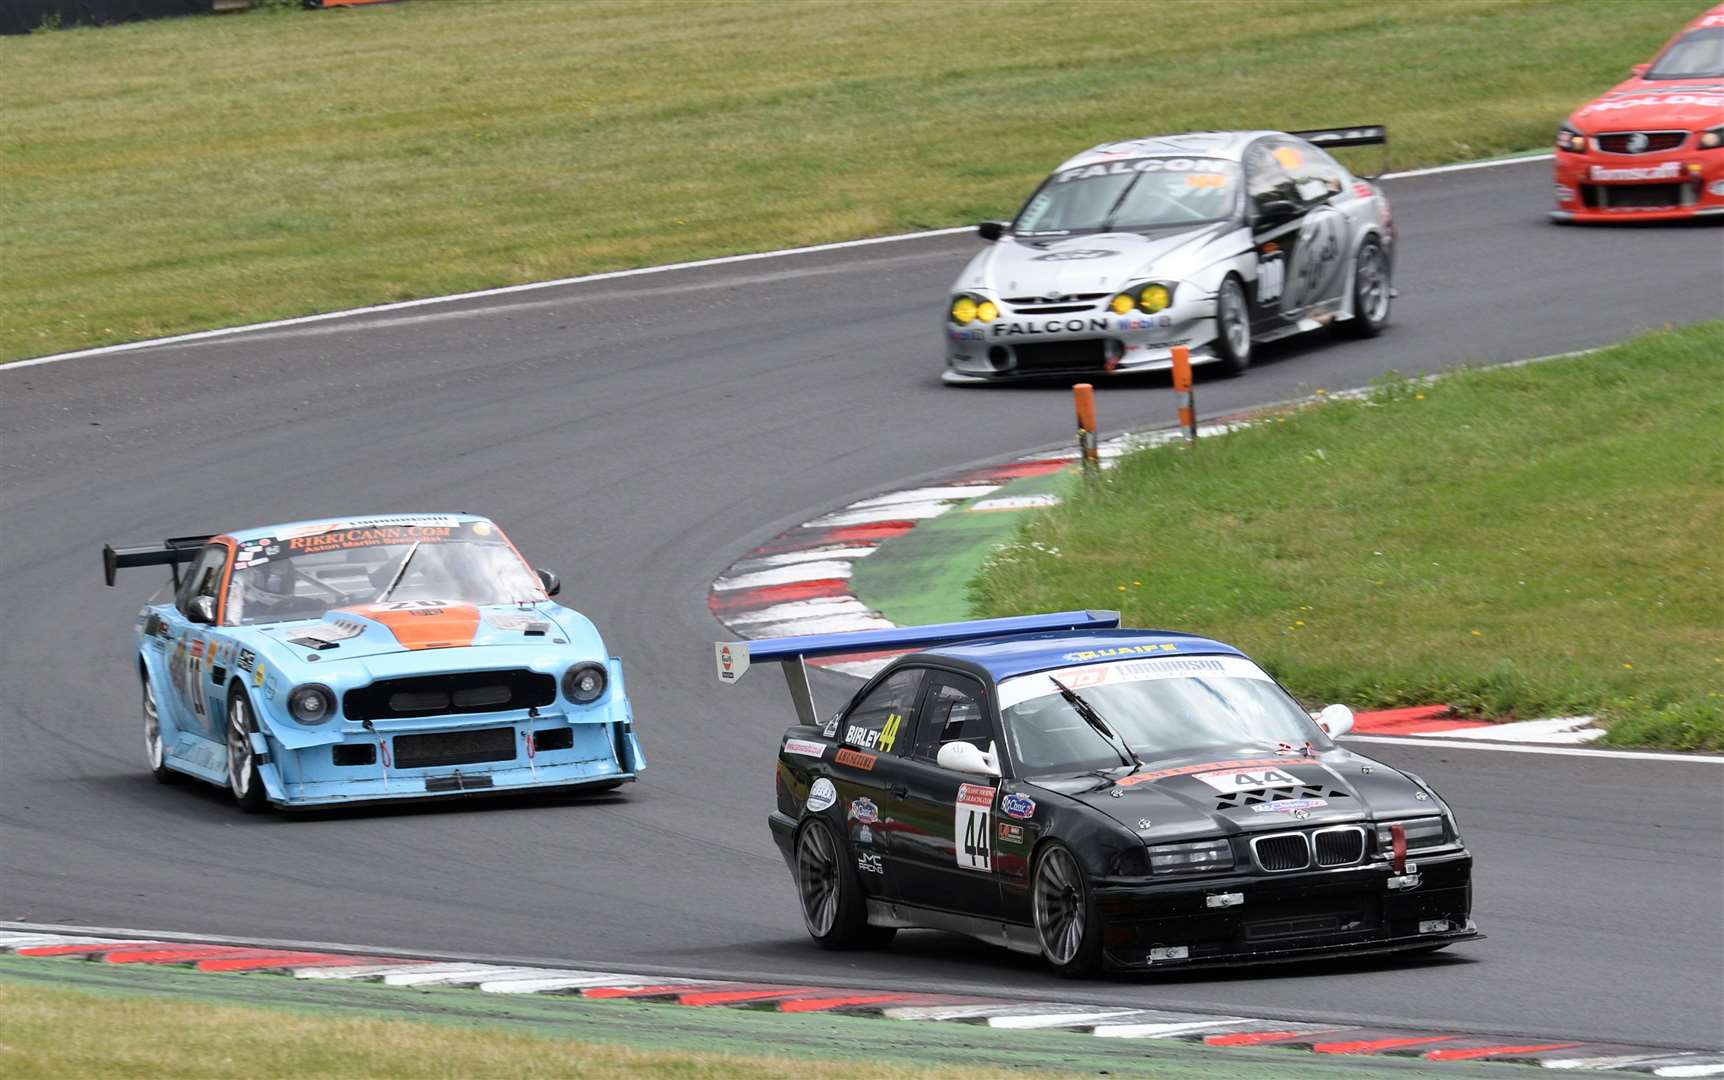 Rod Birley, from West Kingsdown, scored a third and fourth in class in the Classic Thunder races on Saturday in his BMW E36. Picture: Simon Hildrew